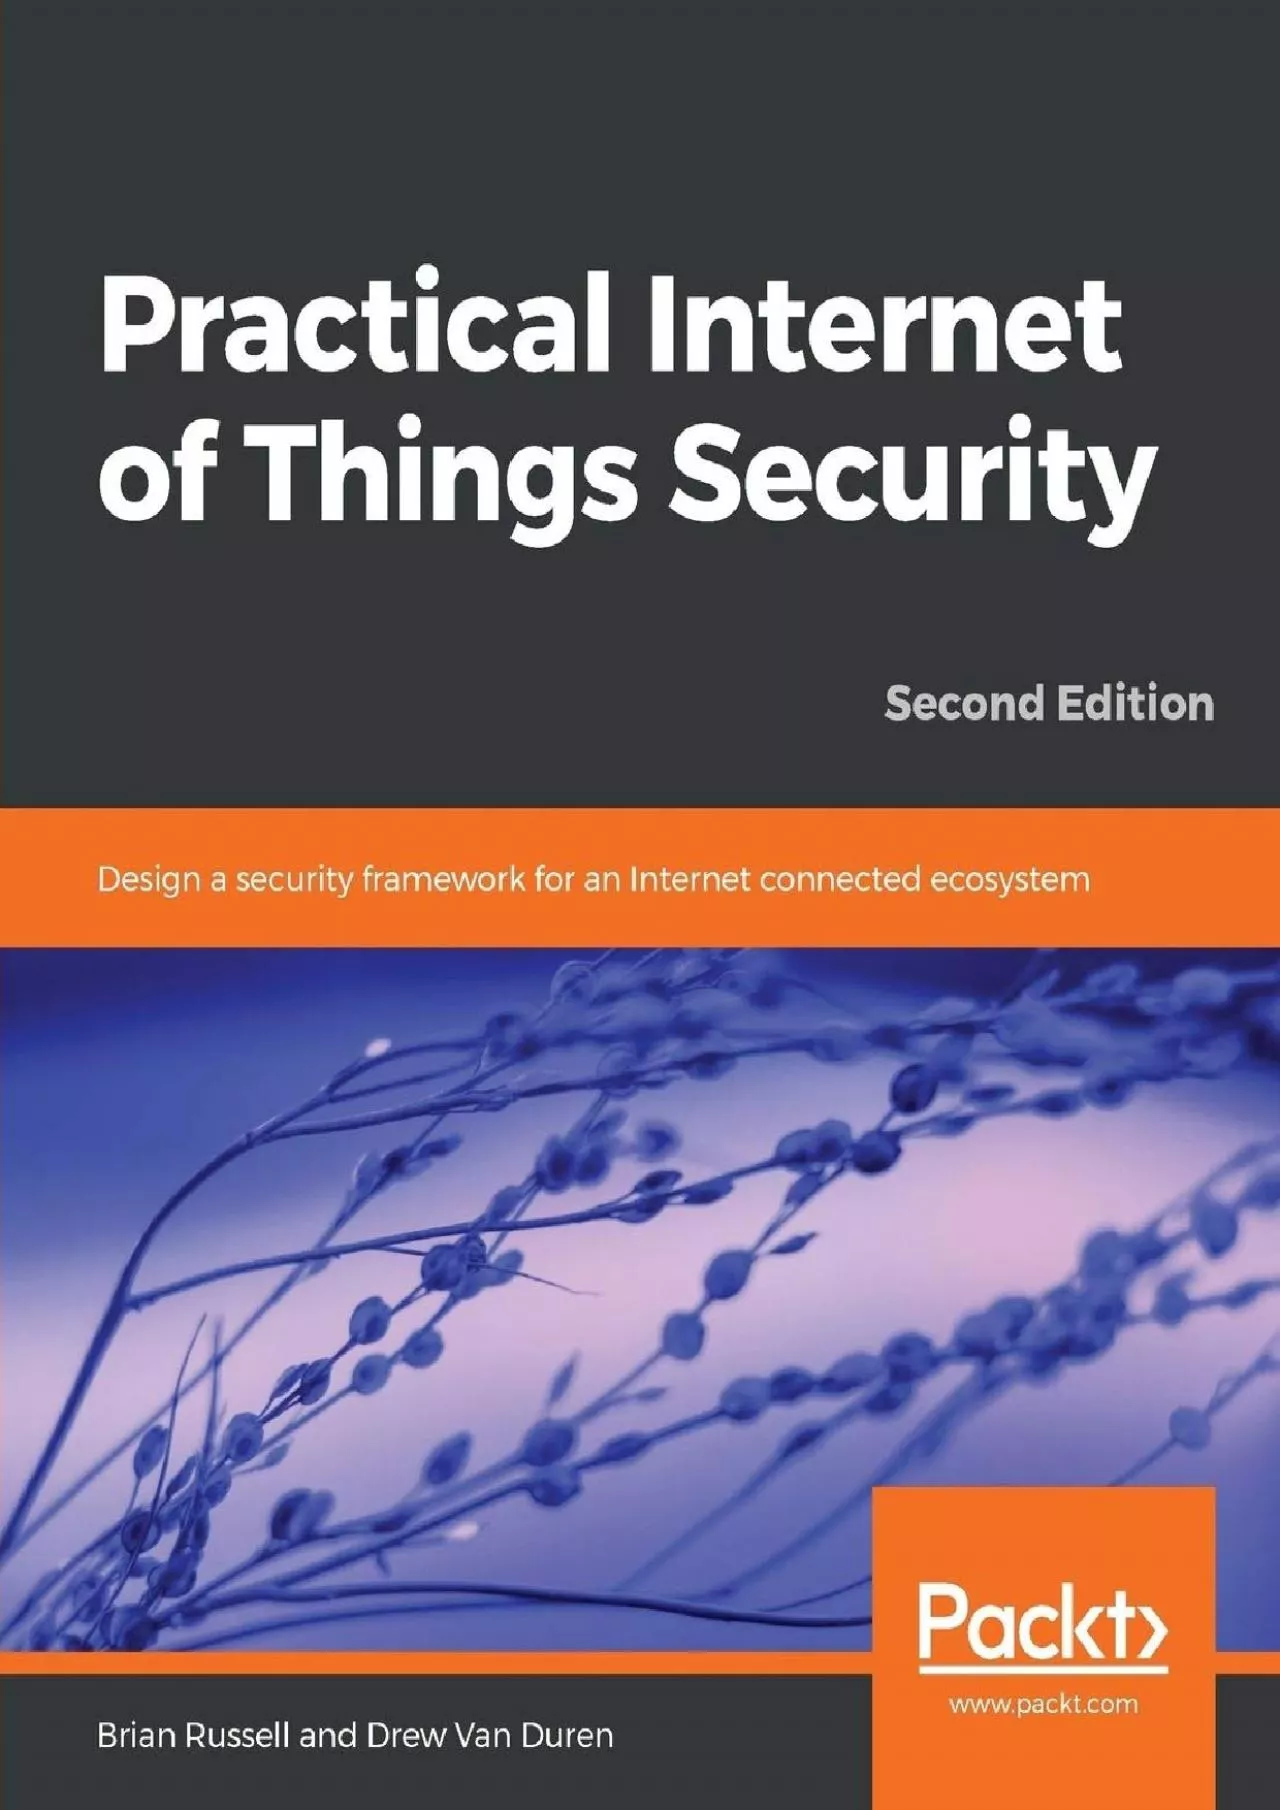 [DOWLOAD]-Practical Internet of Things Security: Design a security framework for an Internet